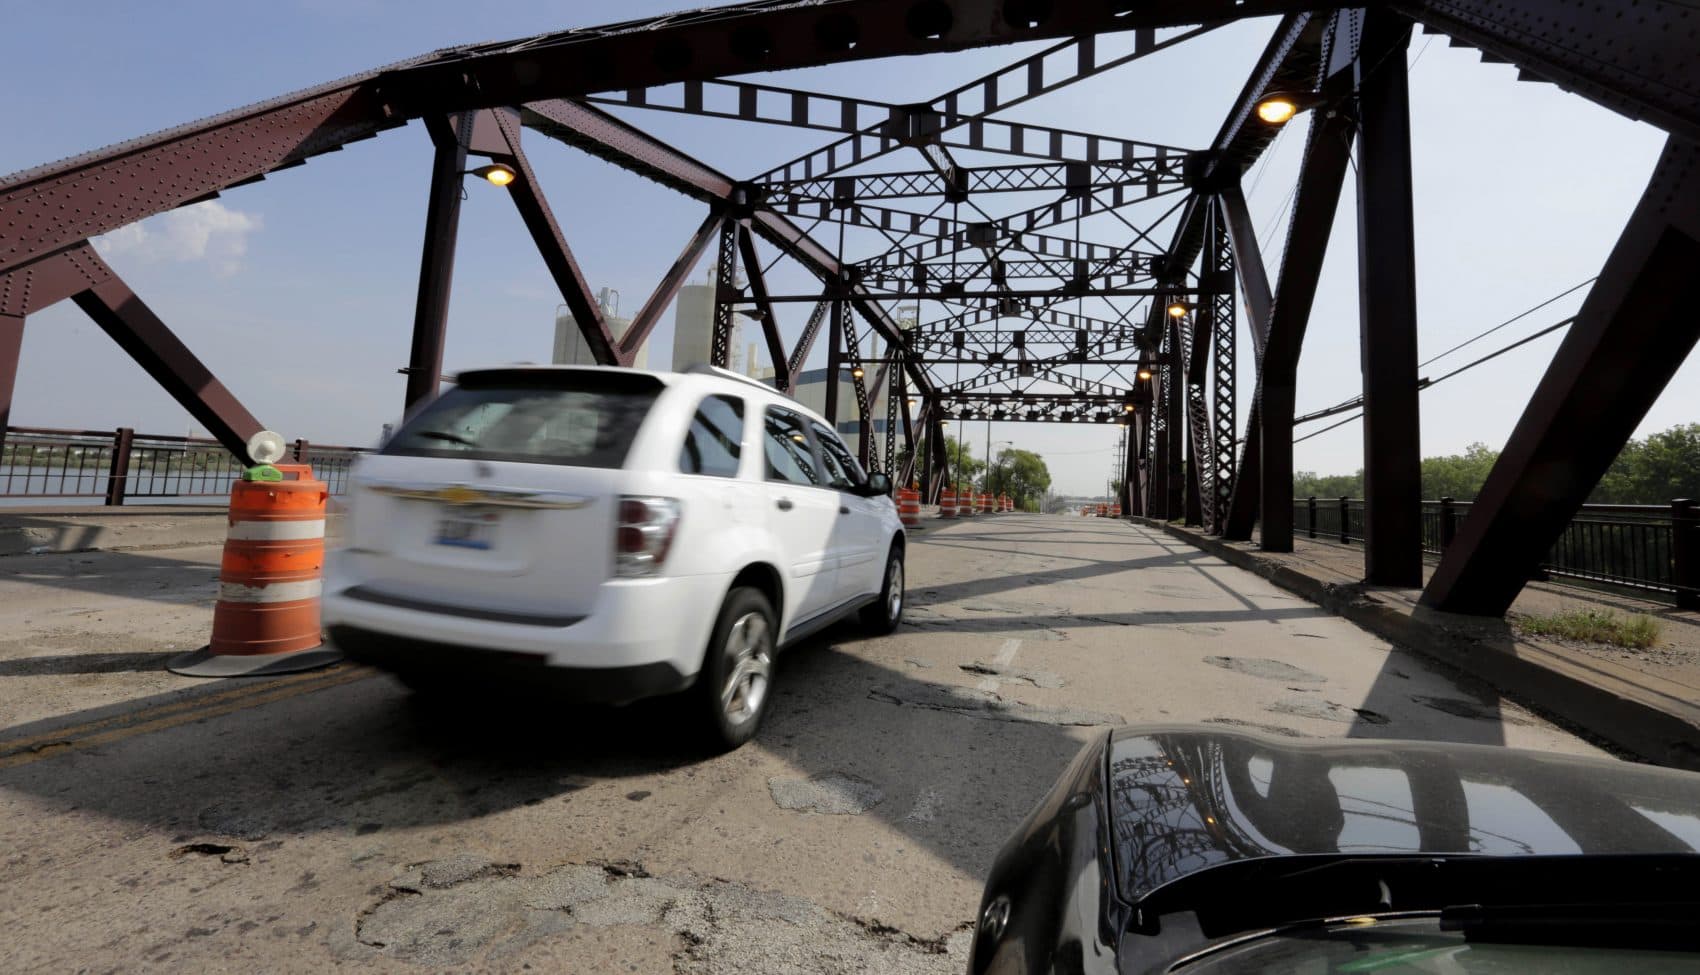 Vehicles drive on the 130th St. bridge over the Little Calumet River in Chicago in 2013. The bridge was classified as both &quot;structurally deficient&quot; and &quot;fracture critical&quot; in federal data for 2012. (M. Spencer Green/AP)